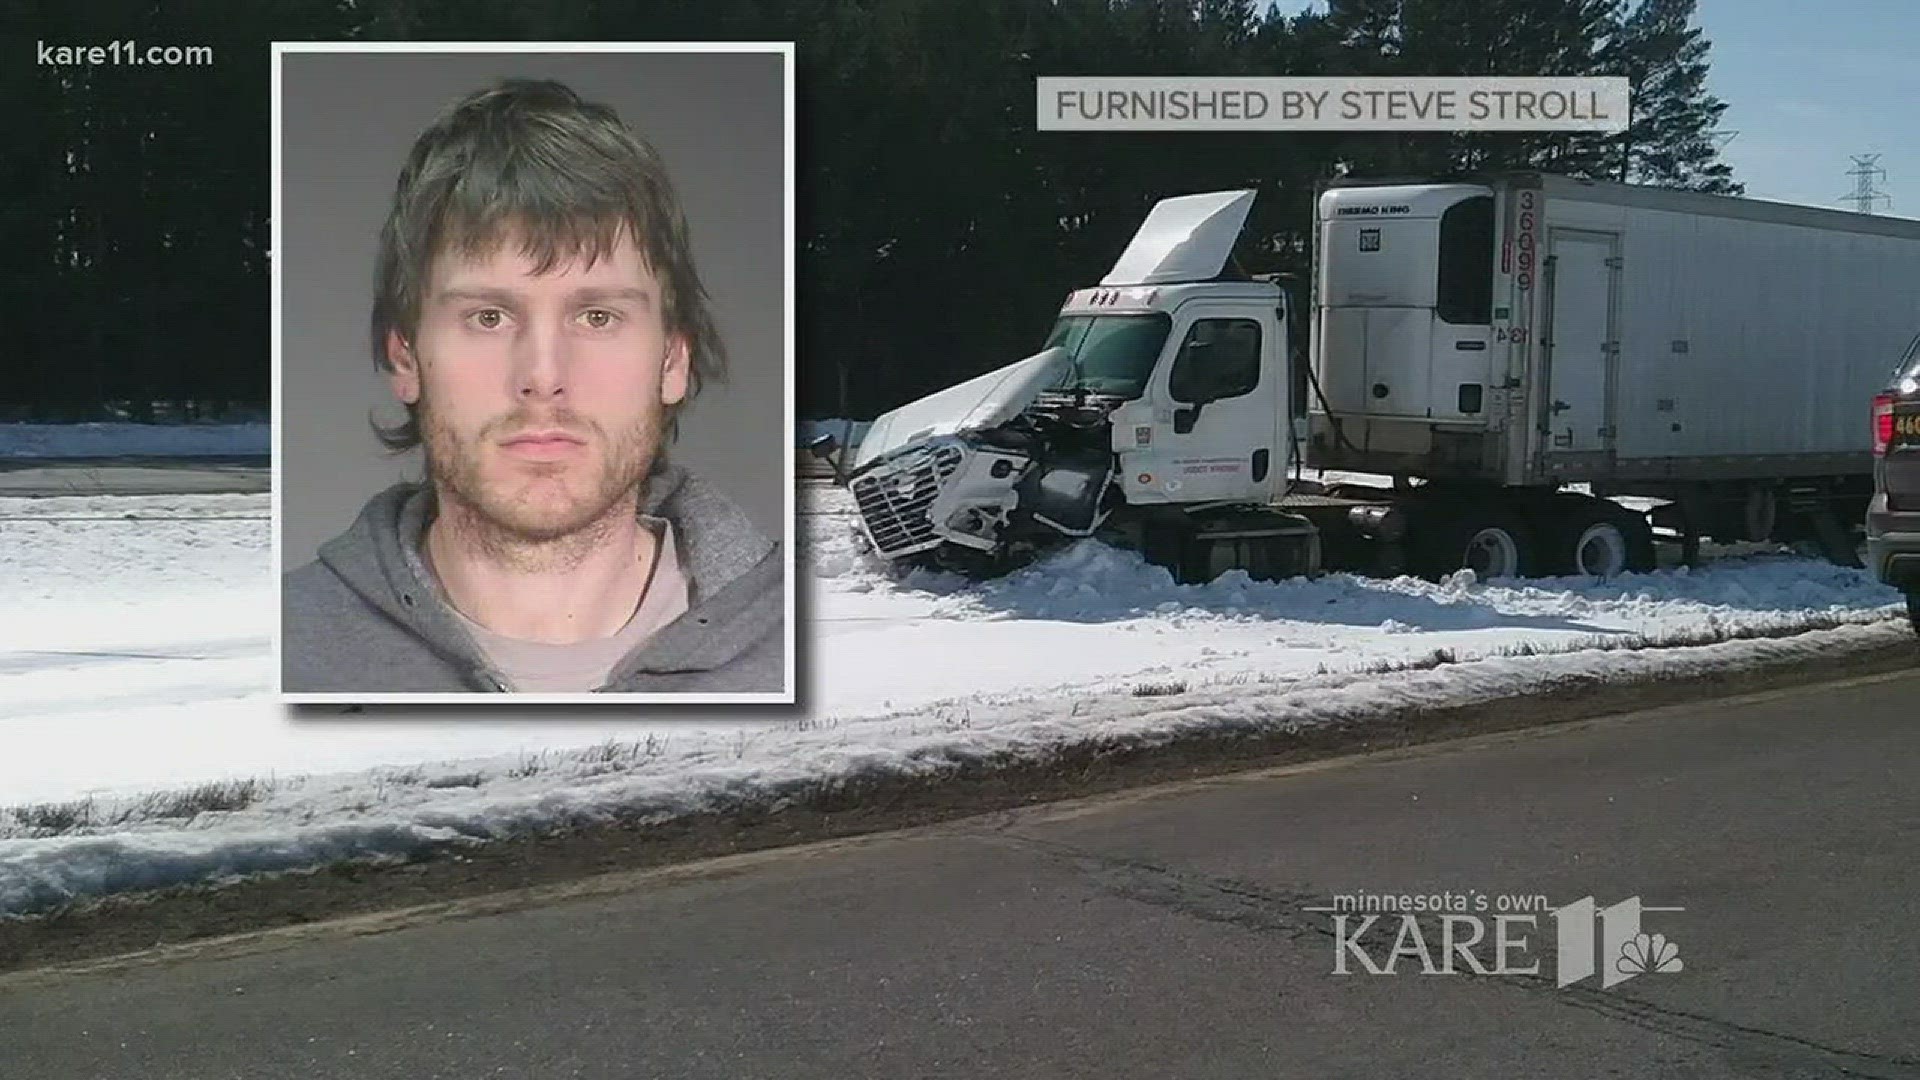 Man charged in fatal Lake Elmo crash can drive, judge rules